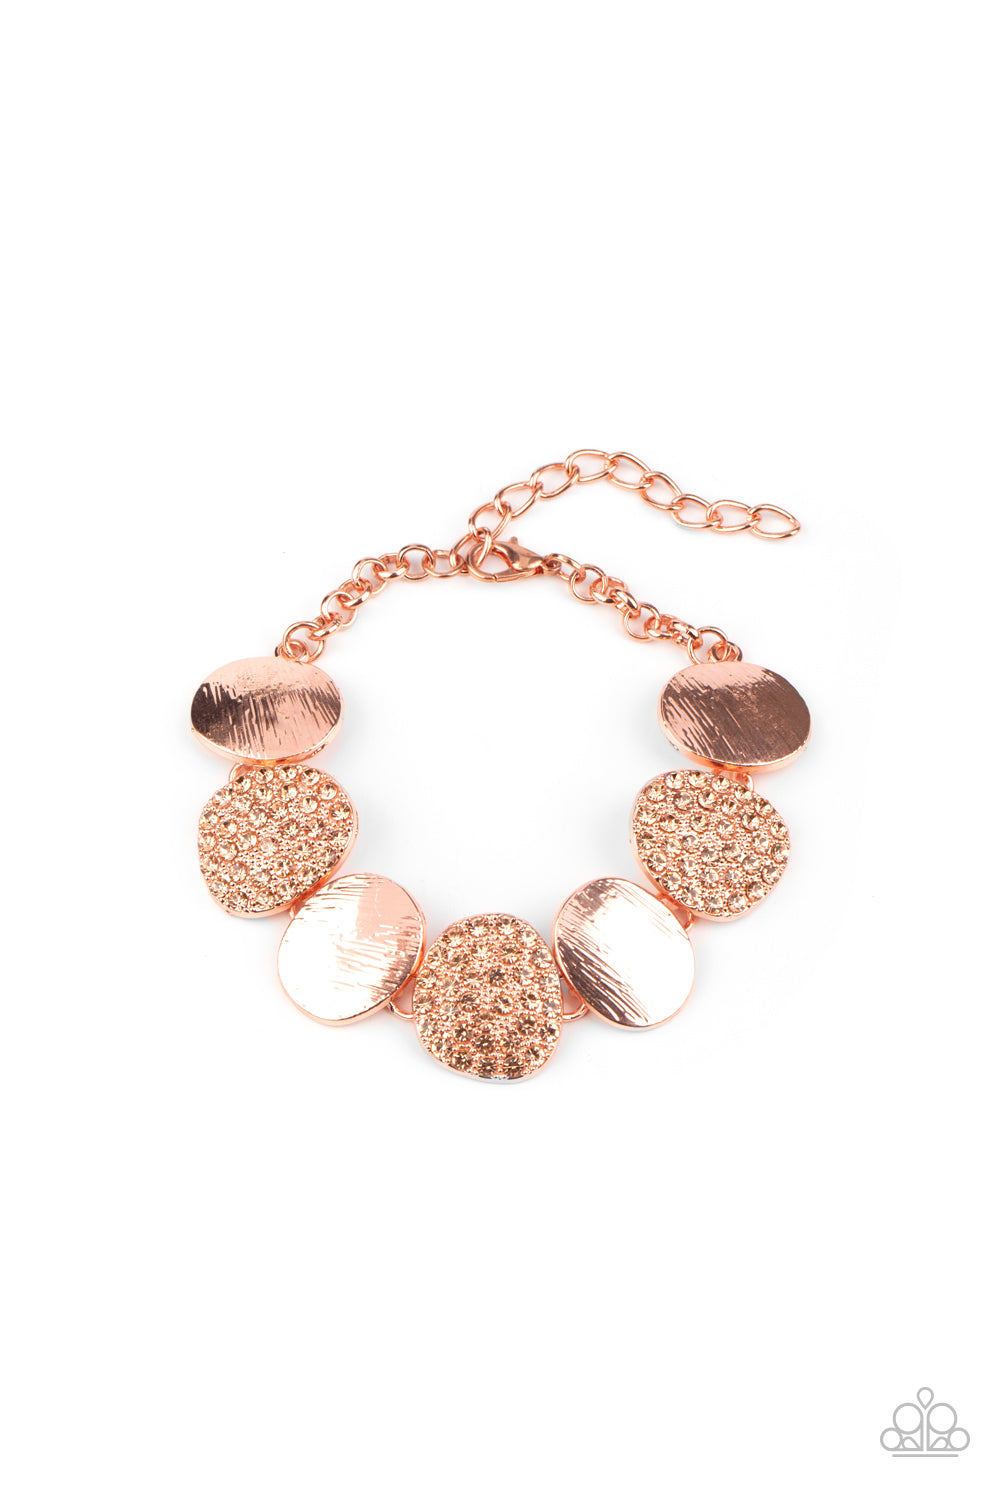 Paparazzi Tough LUXE - Copper Bracelet - A Finishing Touch Jewelry